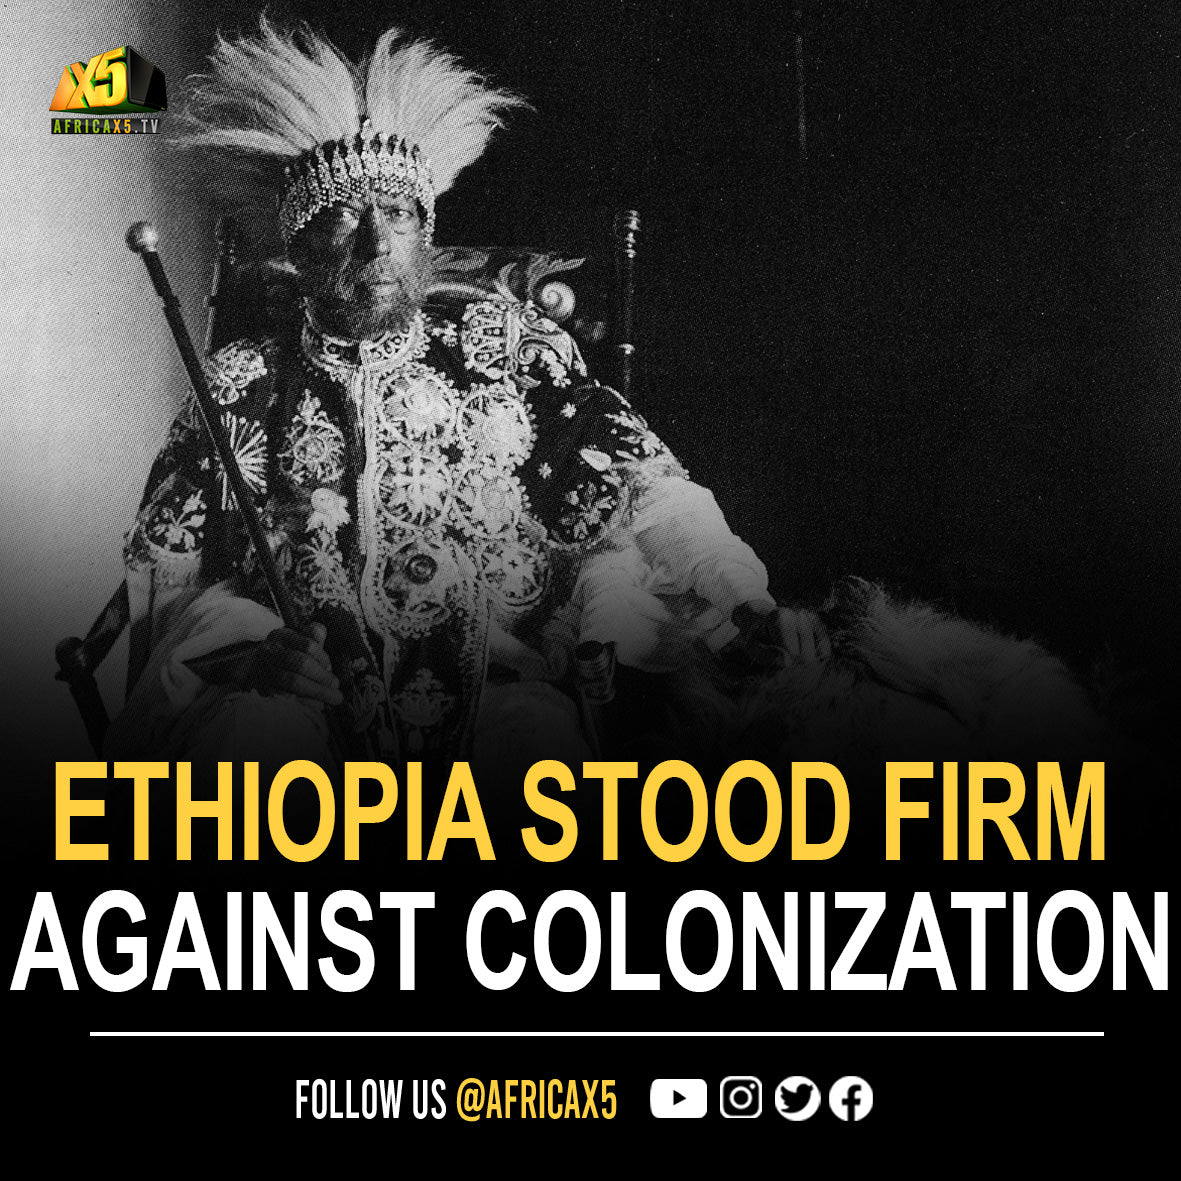 The Unyielding Spirit: Why Ethiopia Stood Firm Against Colonization